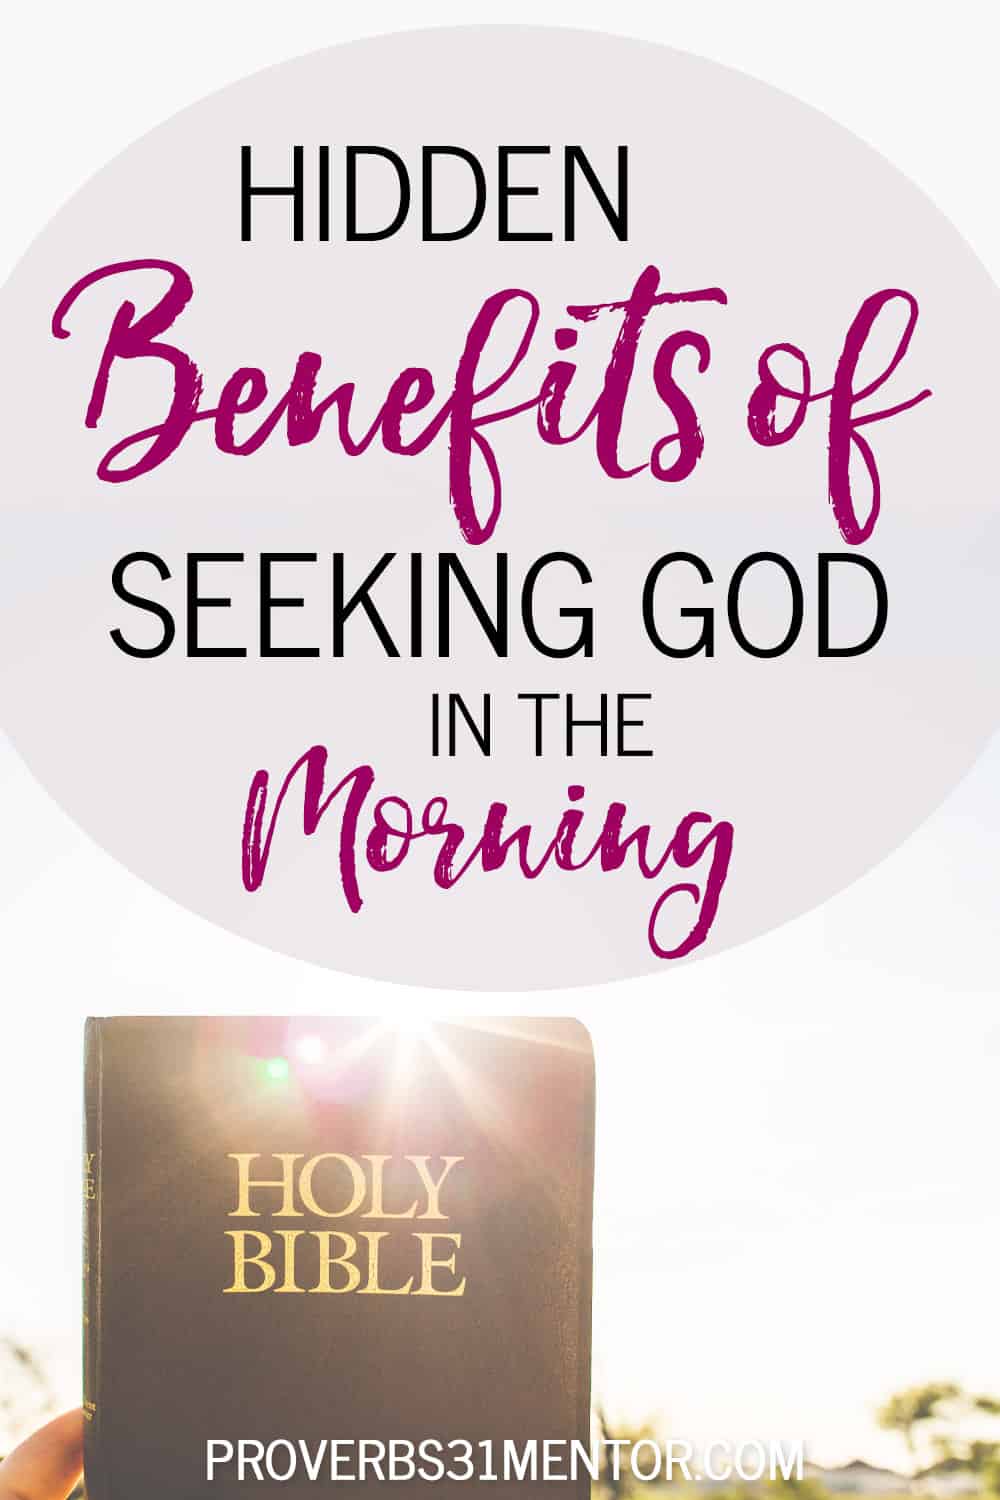 Title- Hidden Benefits of Seeking God in the Morning Picture- Woman holding up Bible in the morning sun